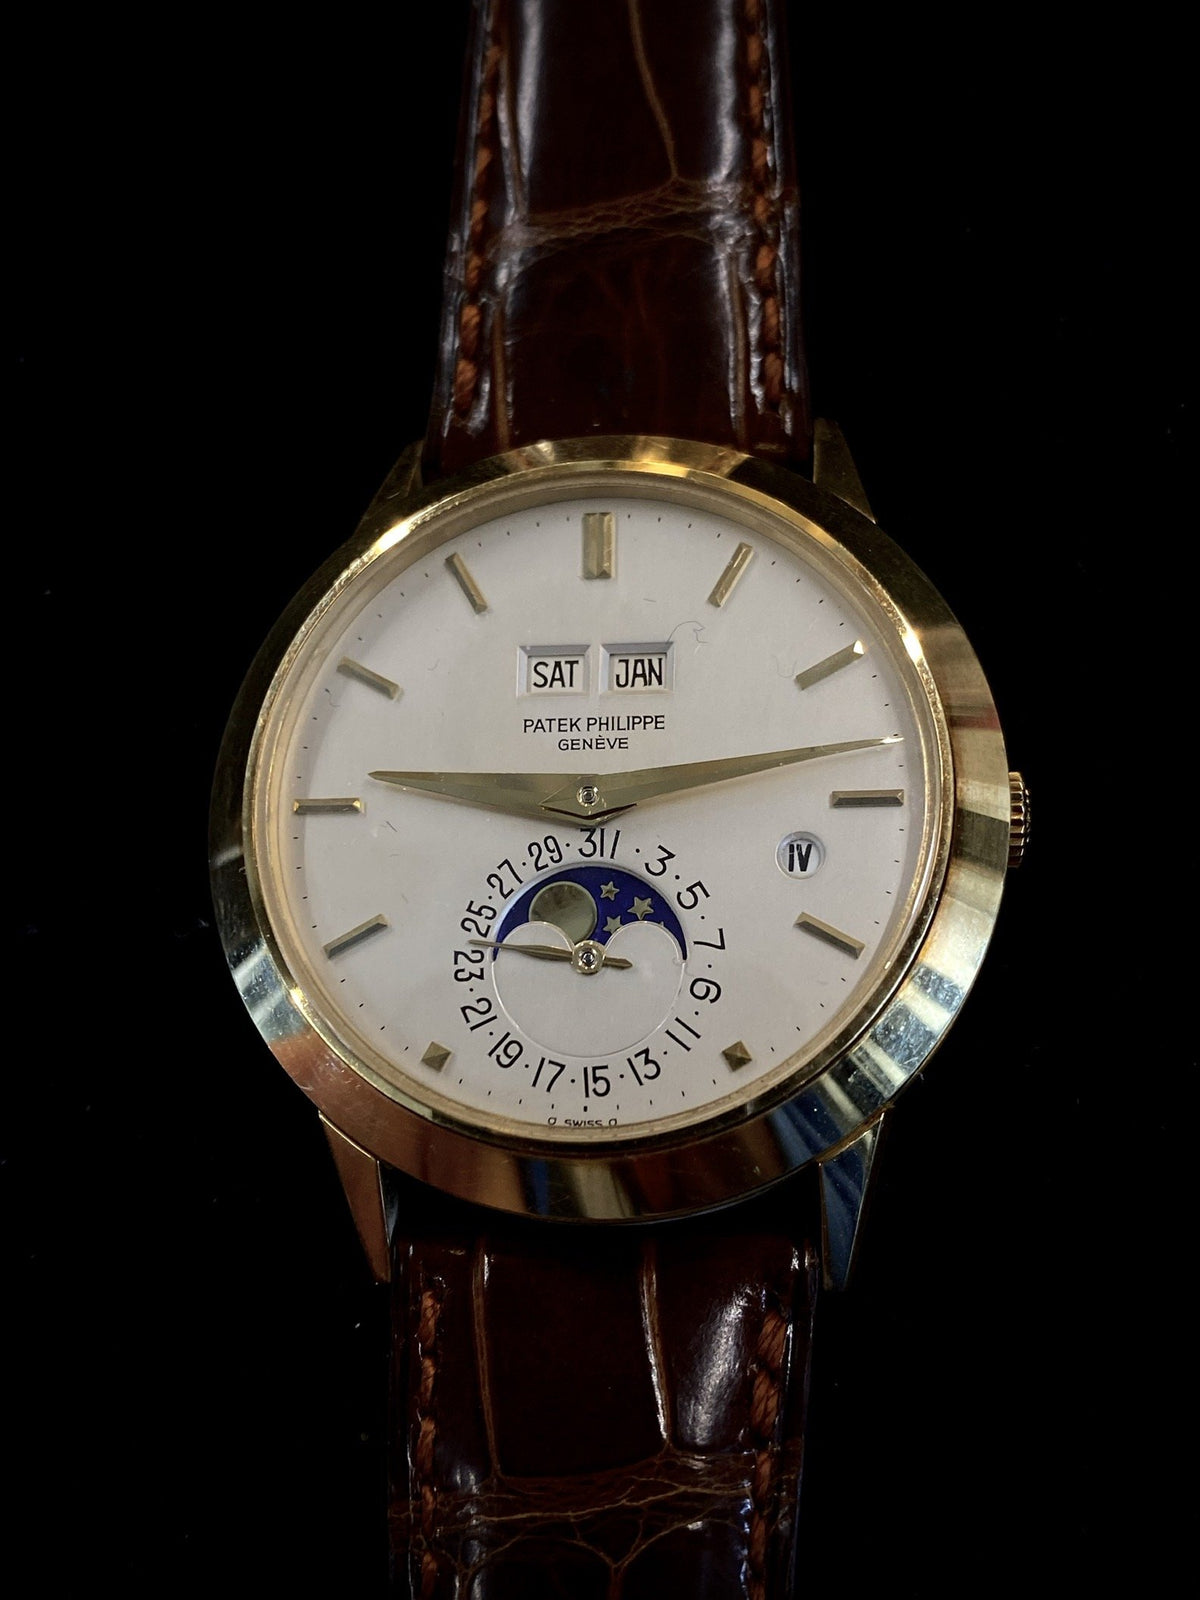 An Exclusive Look into the Very Rare Patek Phillippe Supercomplicated Perpetual Wristwatch